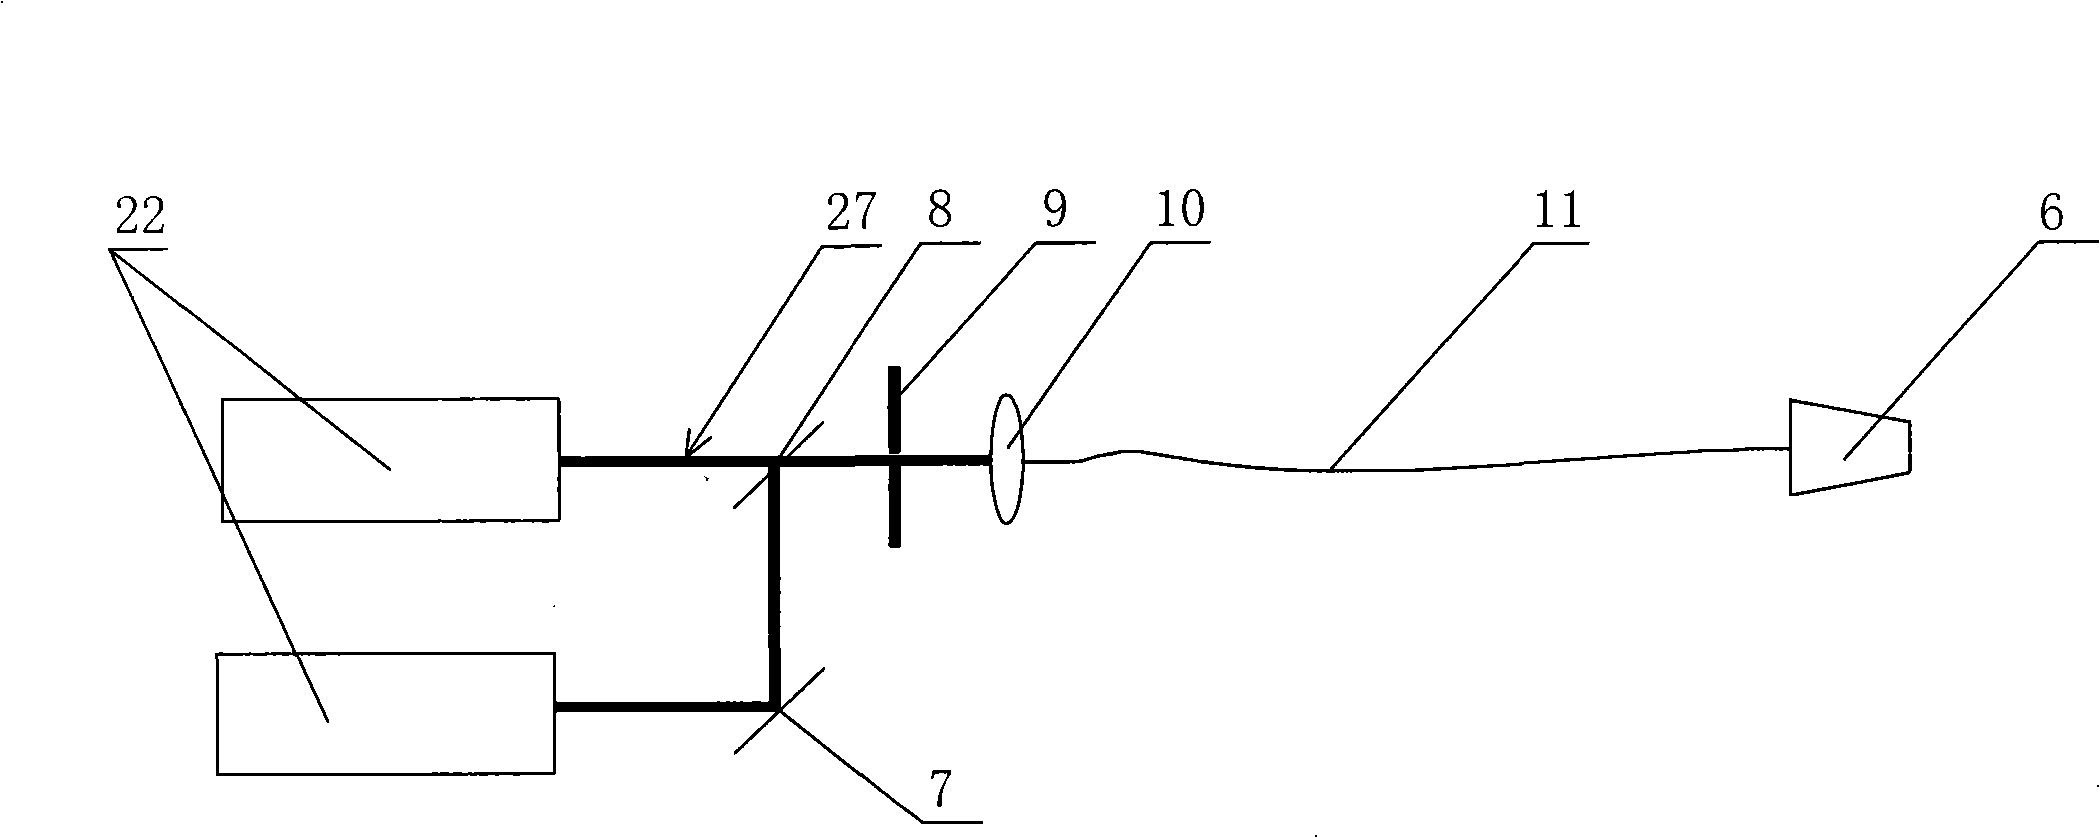 Stereo optical acupuncture device